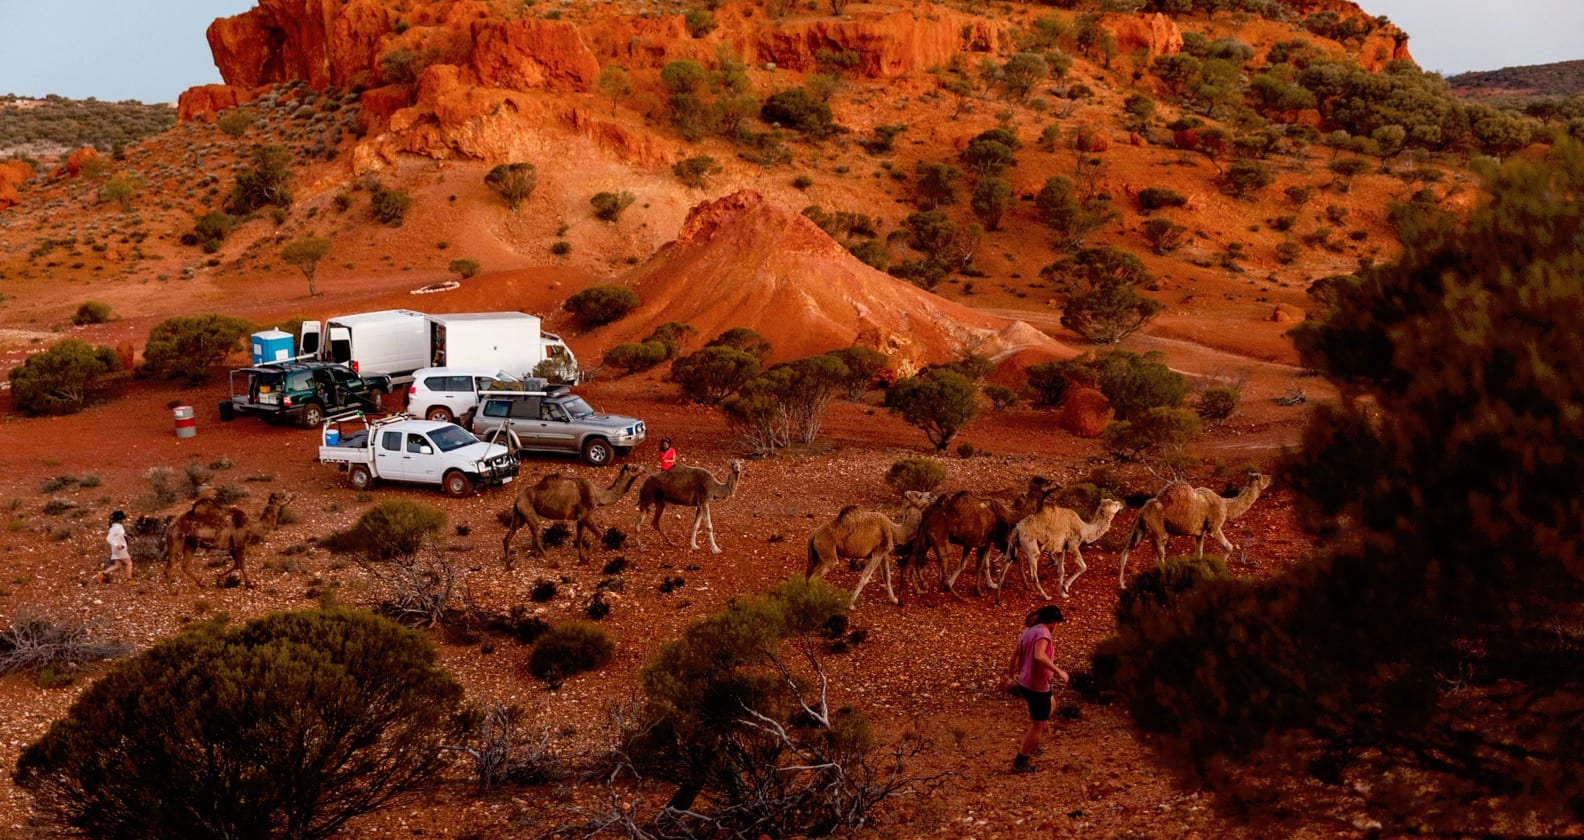 Film crew and camels in the desert